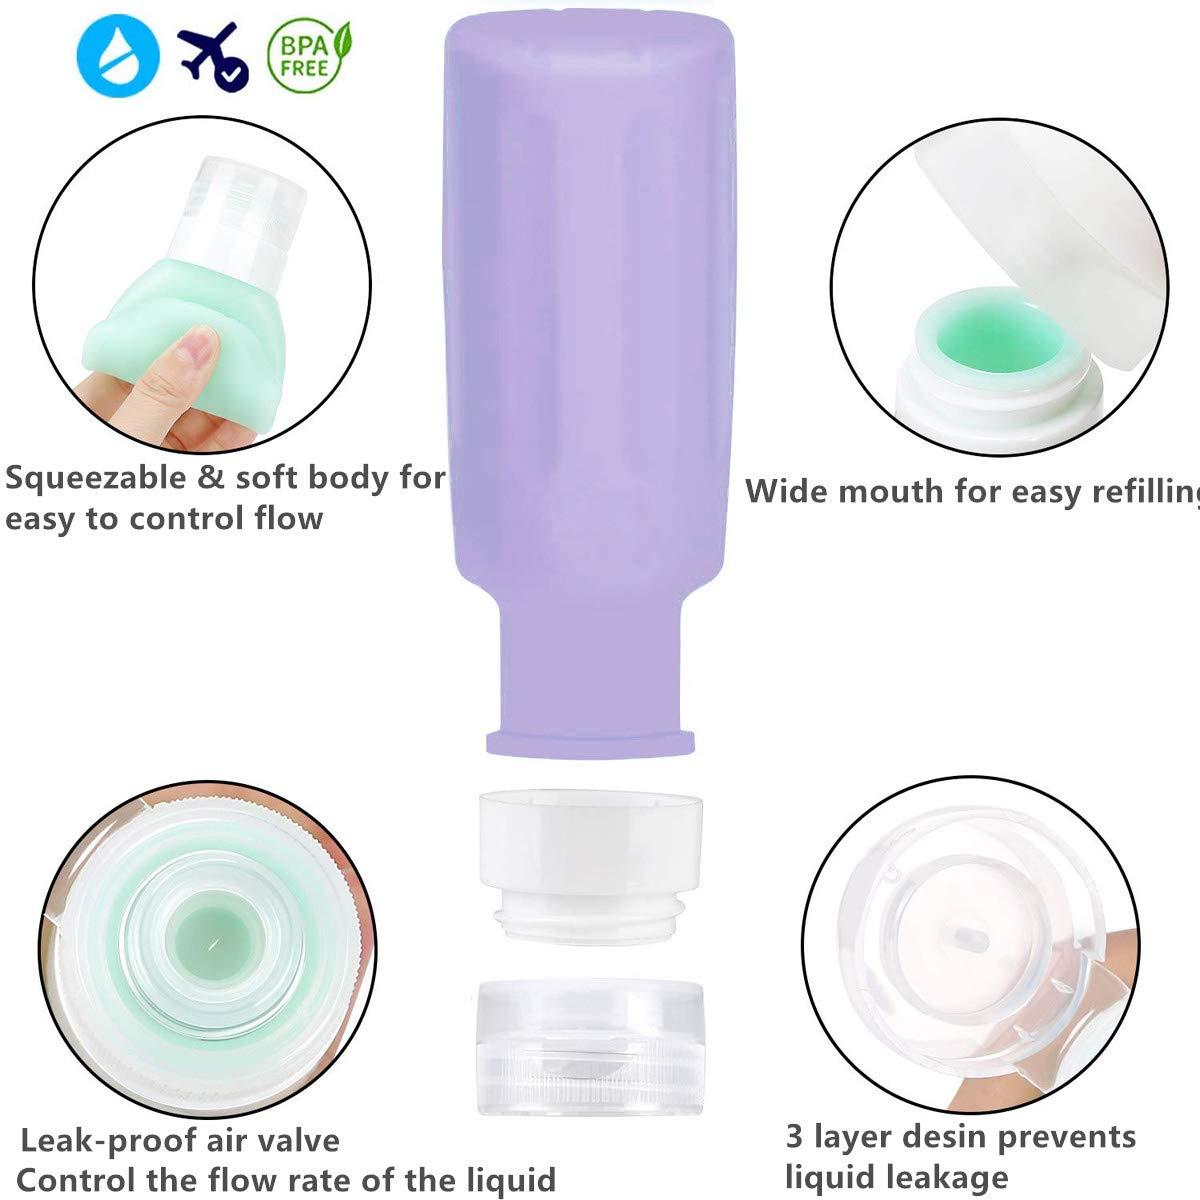 Silicone Travel Bottles Kit Travel Accessories Portable Refillable